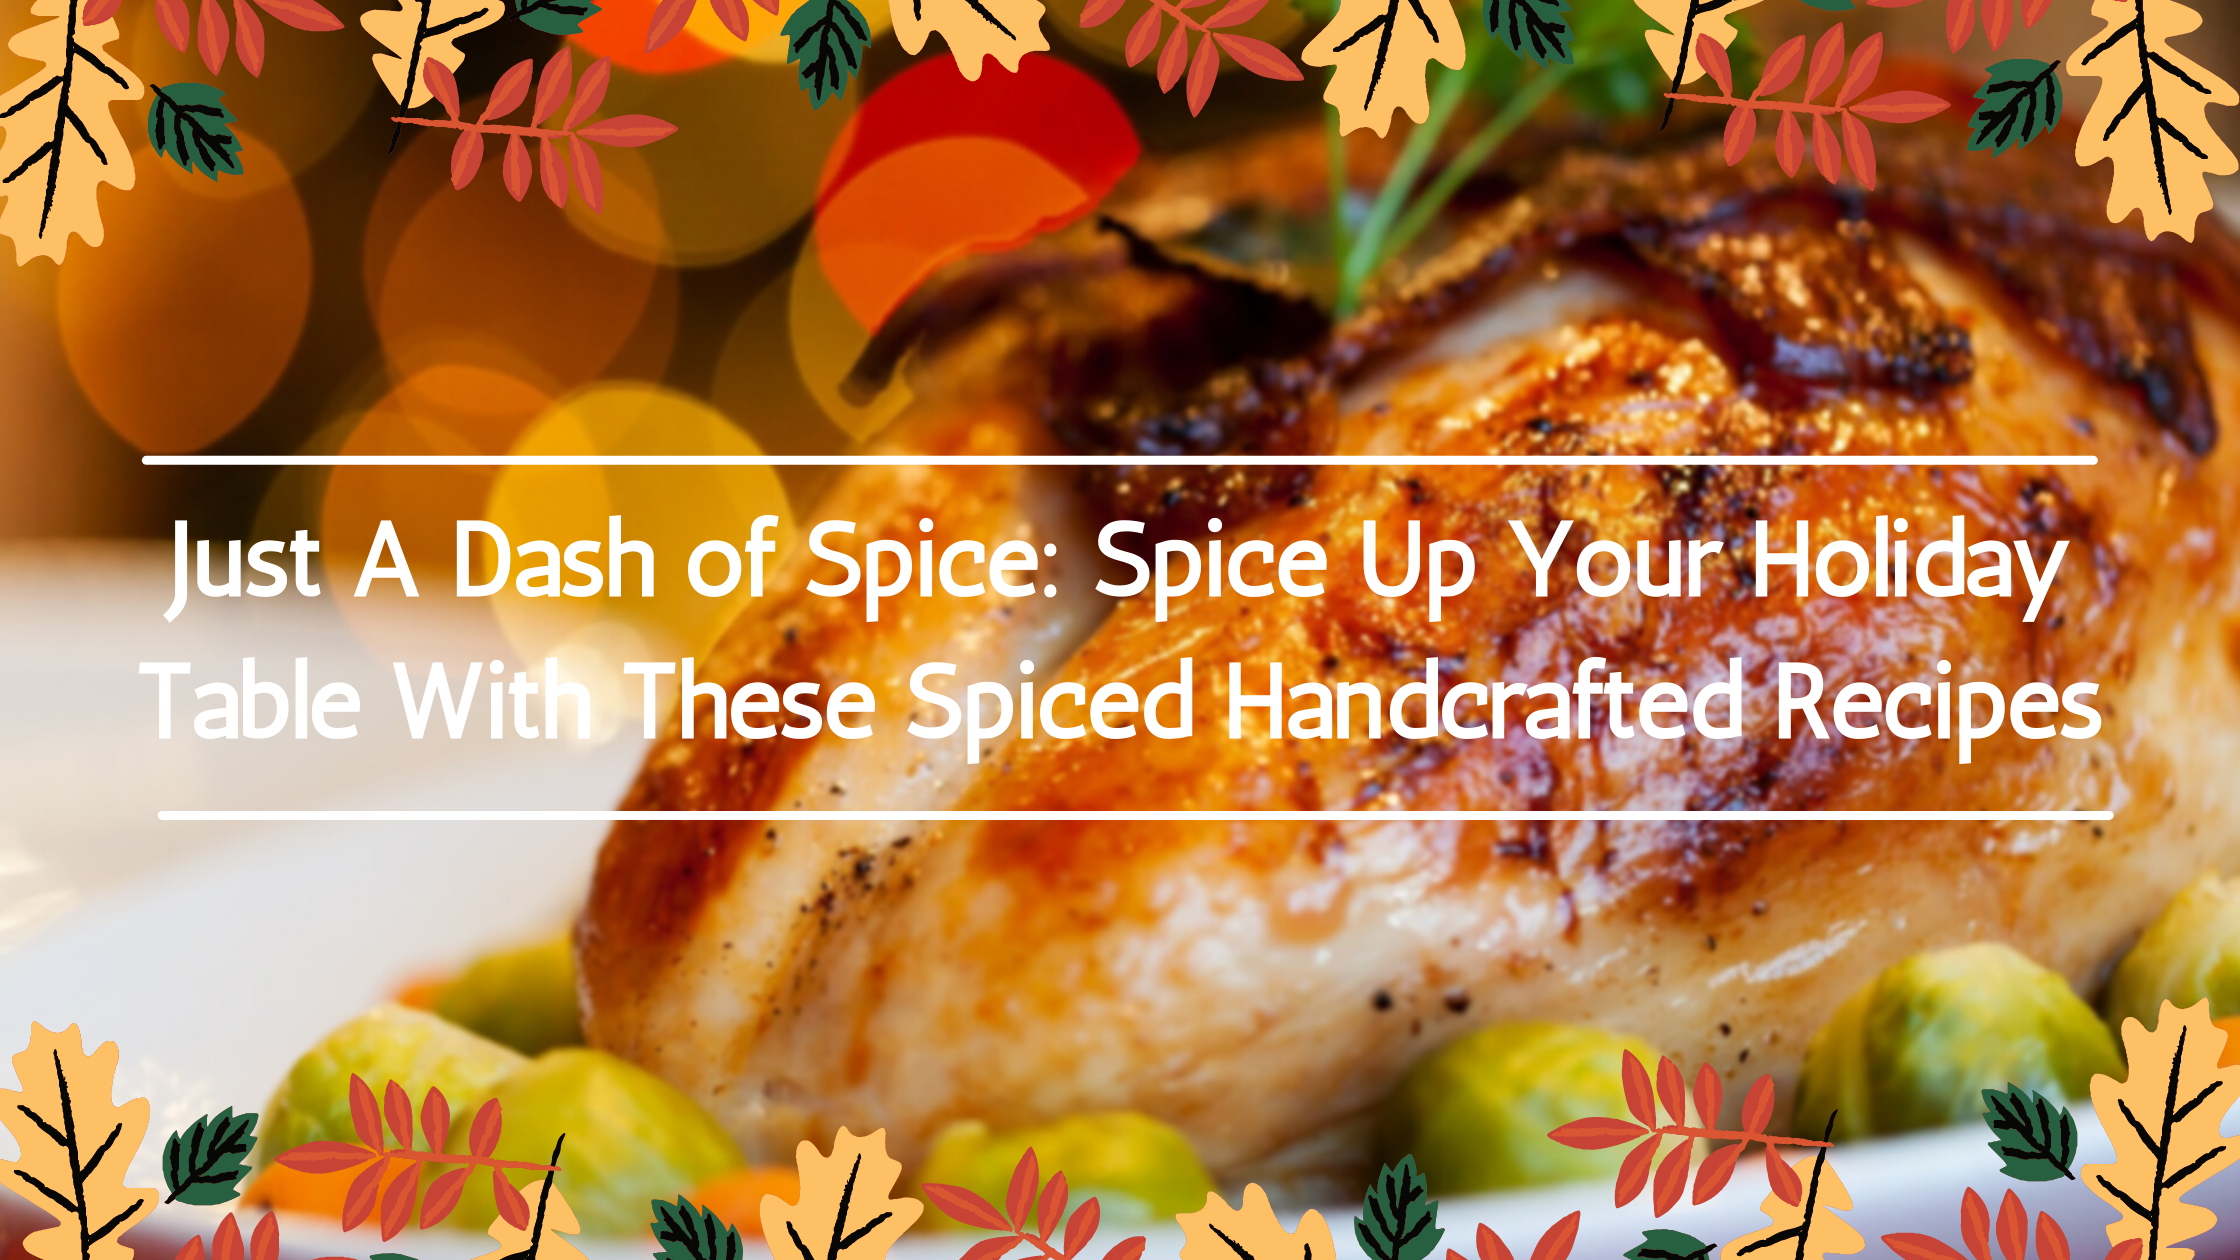 Just A Dash of Spice: Spice Up Your Holiday Table With These Spiced Handcrafted Recipes